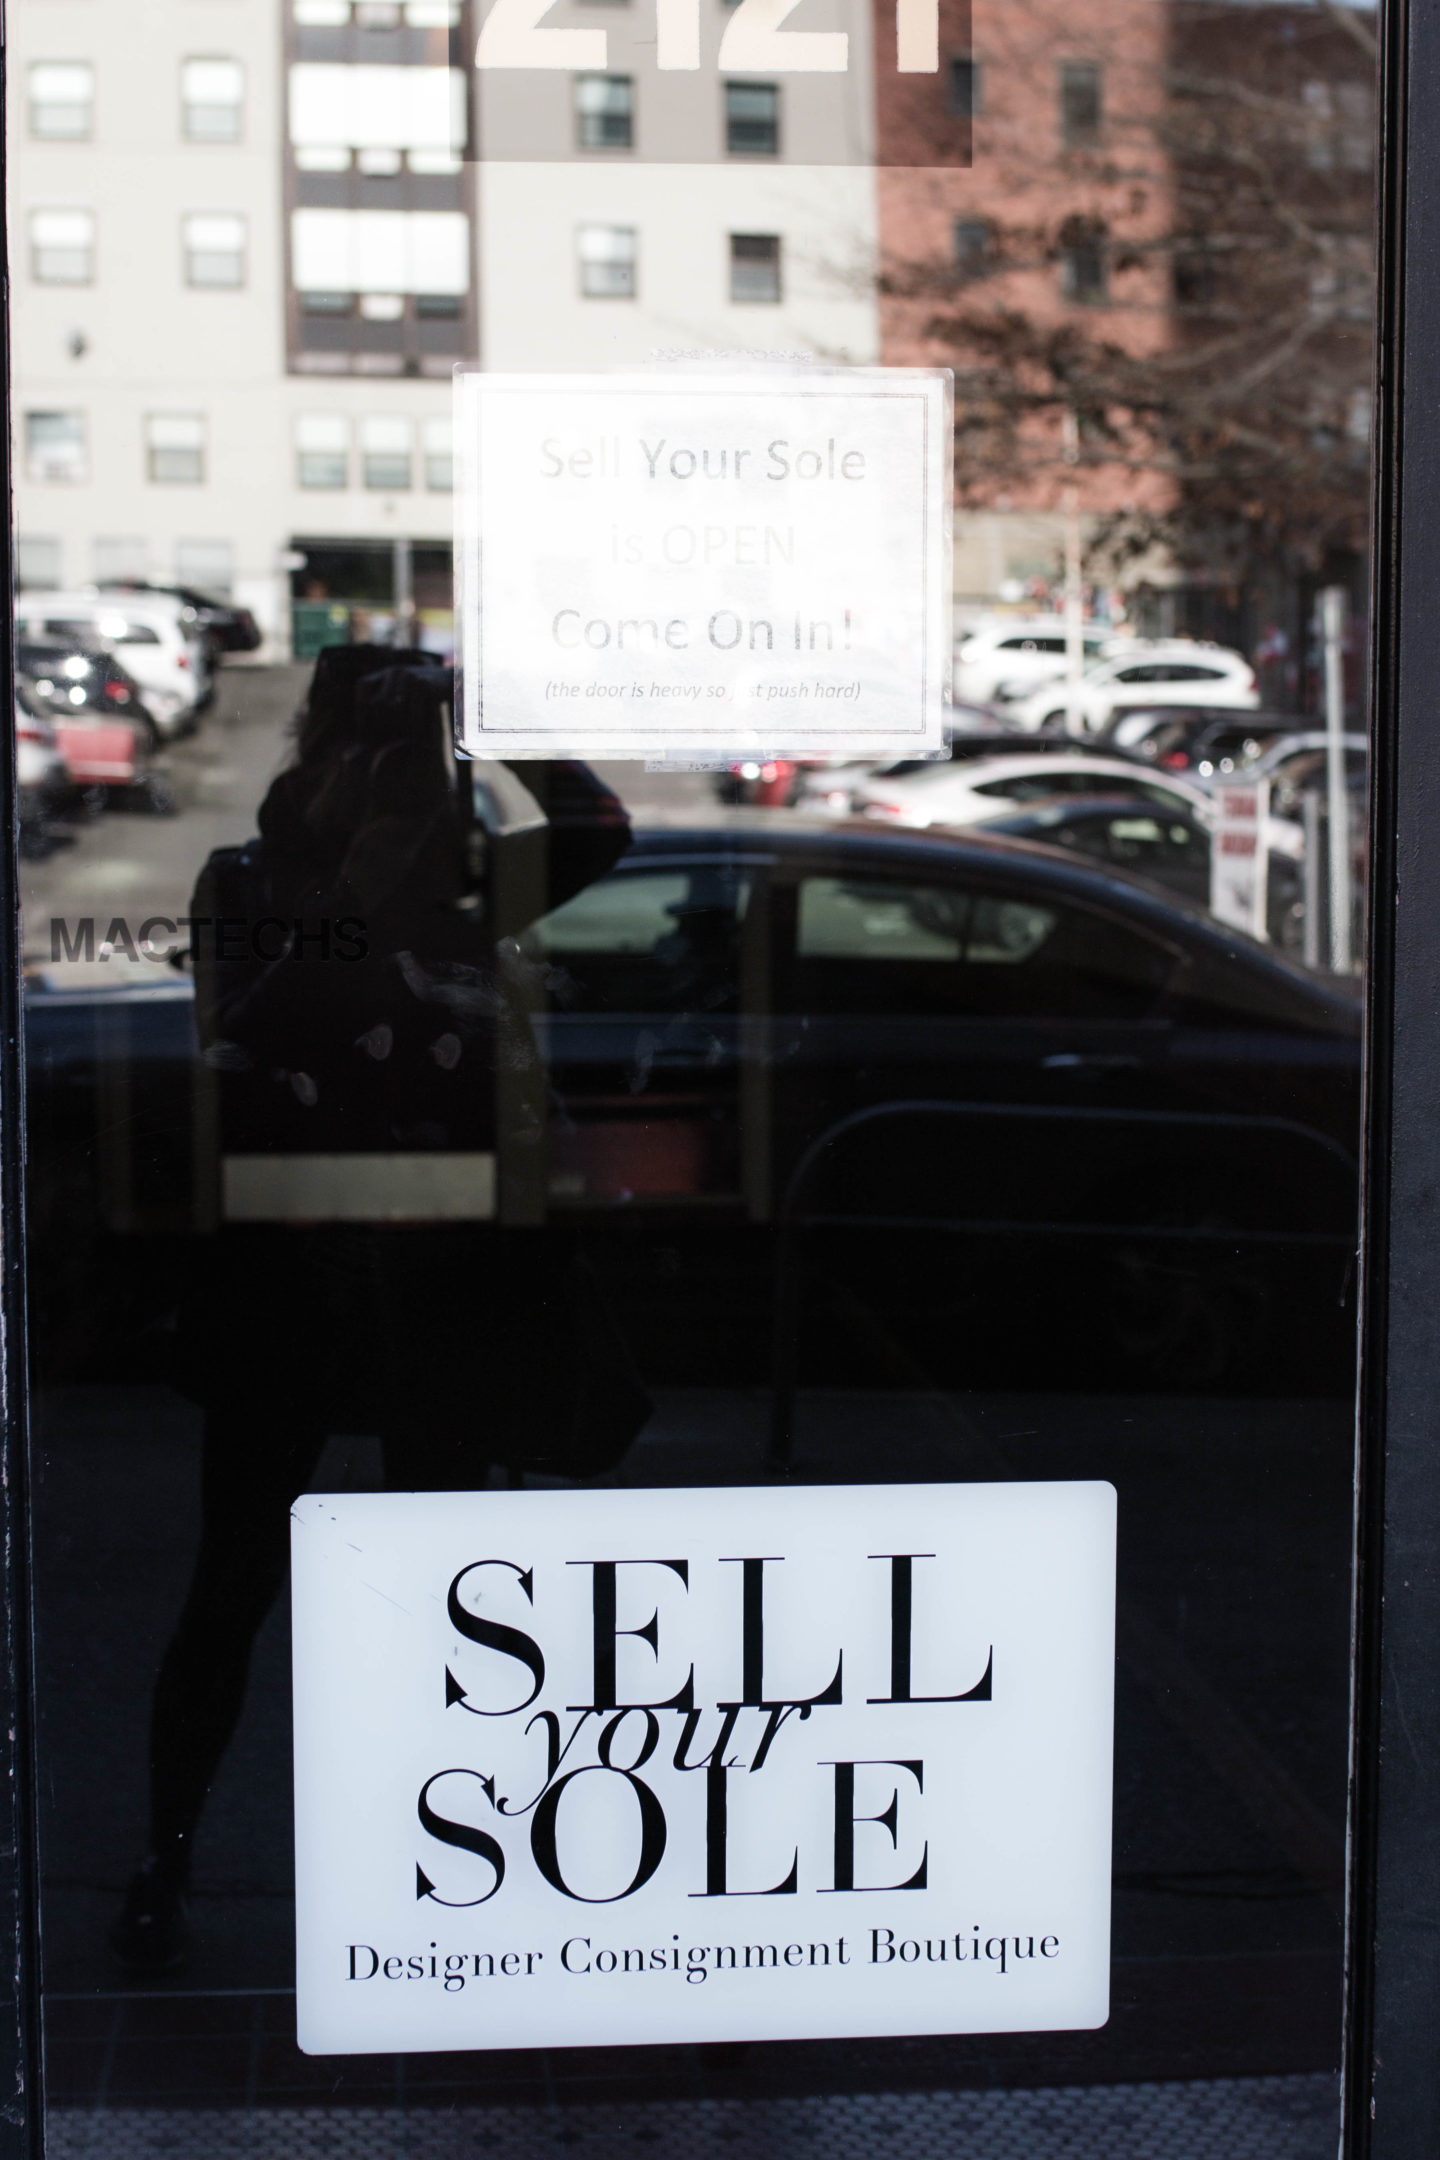 Seattle-Sell Your Sole Consignment